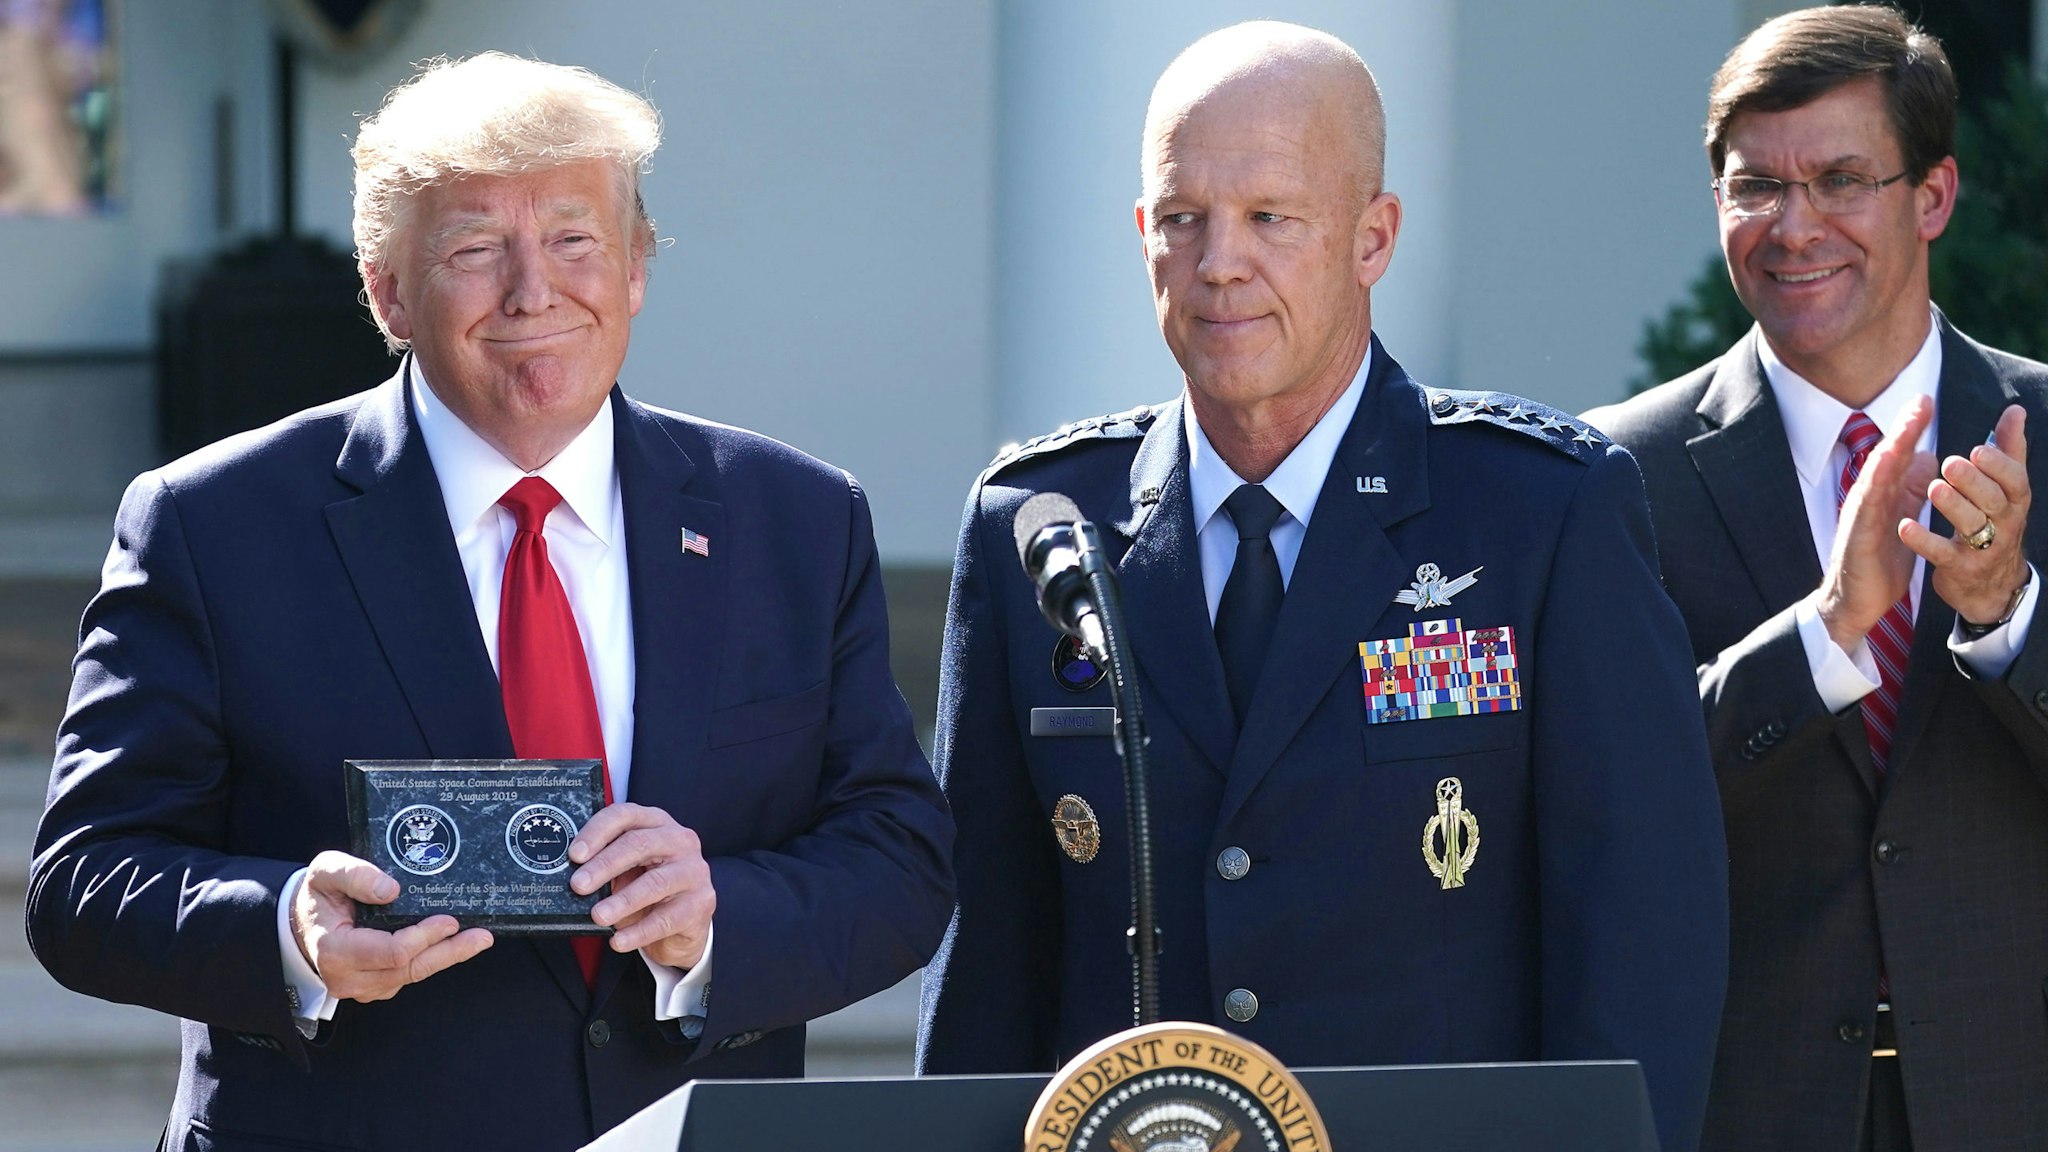 WASHINGTON, DC - AUGUST 29: (L-R) U.S. President Donald Trump, U.S. Air Force Gen. John "Jay" Raymond and Defense Secretary Mark Esper attend an event marking the establishment the U.S. Space Command, the sixth national armed service, in the Rose Garden at the White House August 29, 2019 in Washington, DC. Citing potential threats from China and Russia and the nation’s reliance on satellites for defense operations, Trump said the U.S. needs to launch a 'space force.' Raymond will serve as the first head of Space Command, which will have 87 active units handling operations such as missile warning, satellite surveillance, space control and space support.